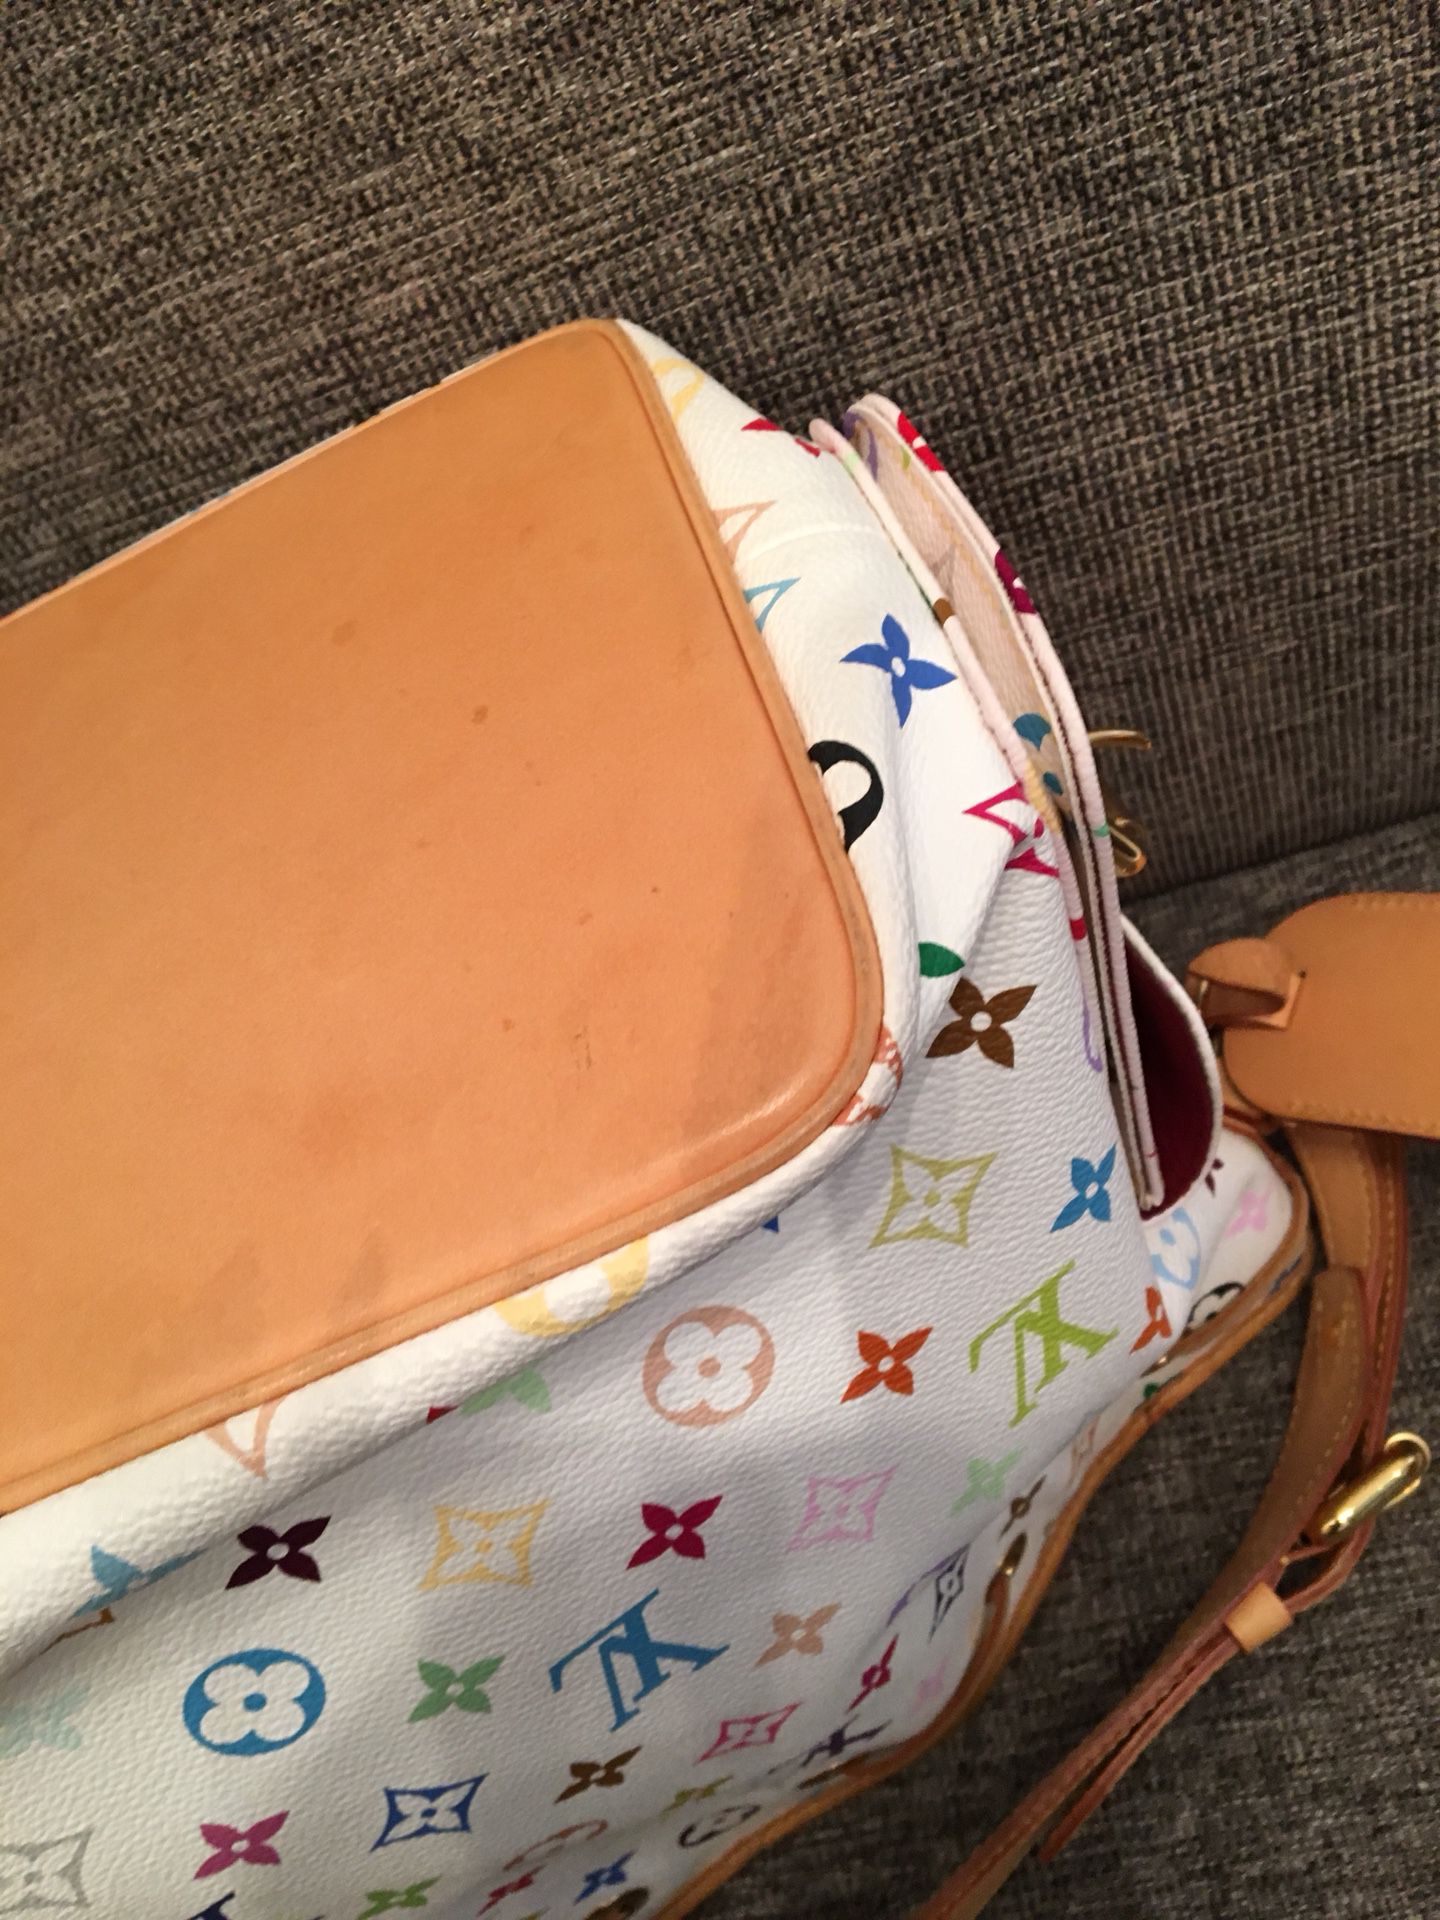 Red Epi Leather LV Noe for Sale in Pittsburg, CA - OfferUp